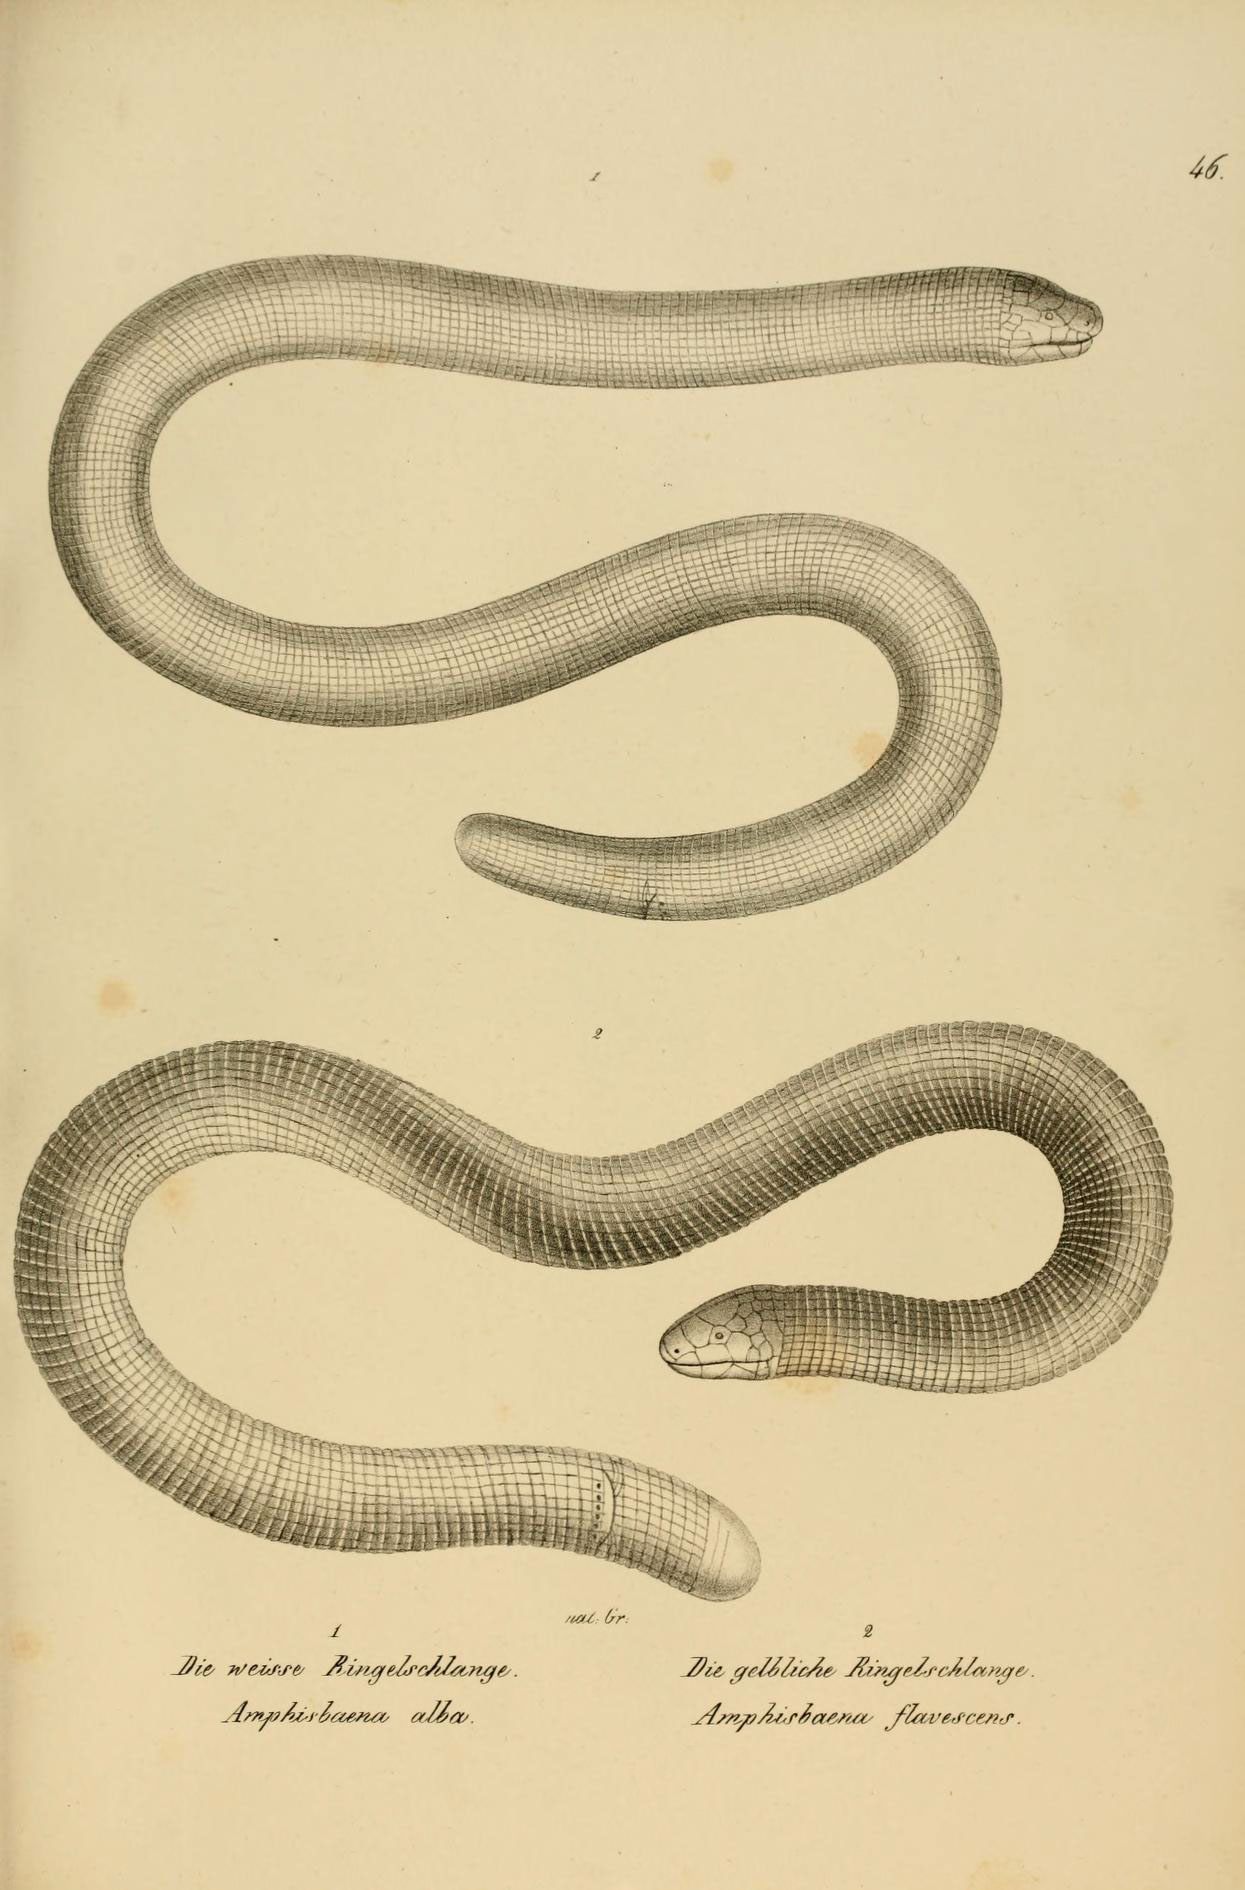 a drawing of two snakes that are sitting next to each other